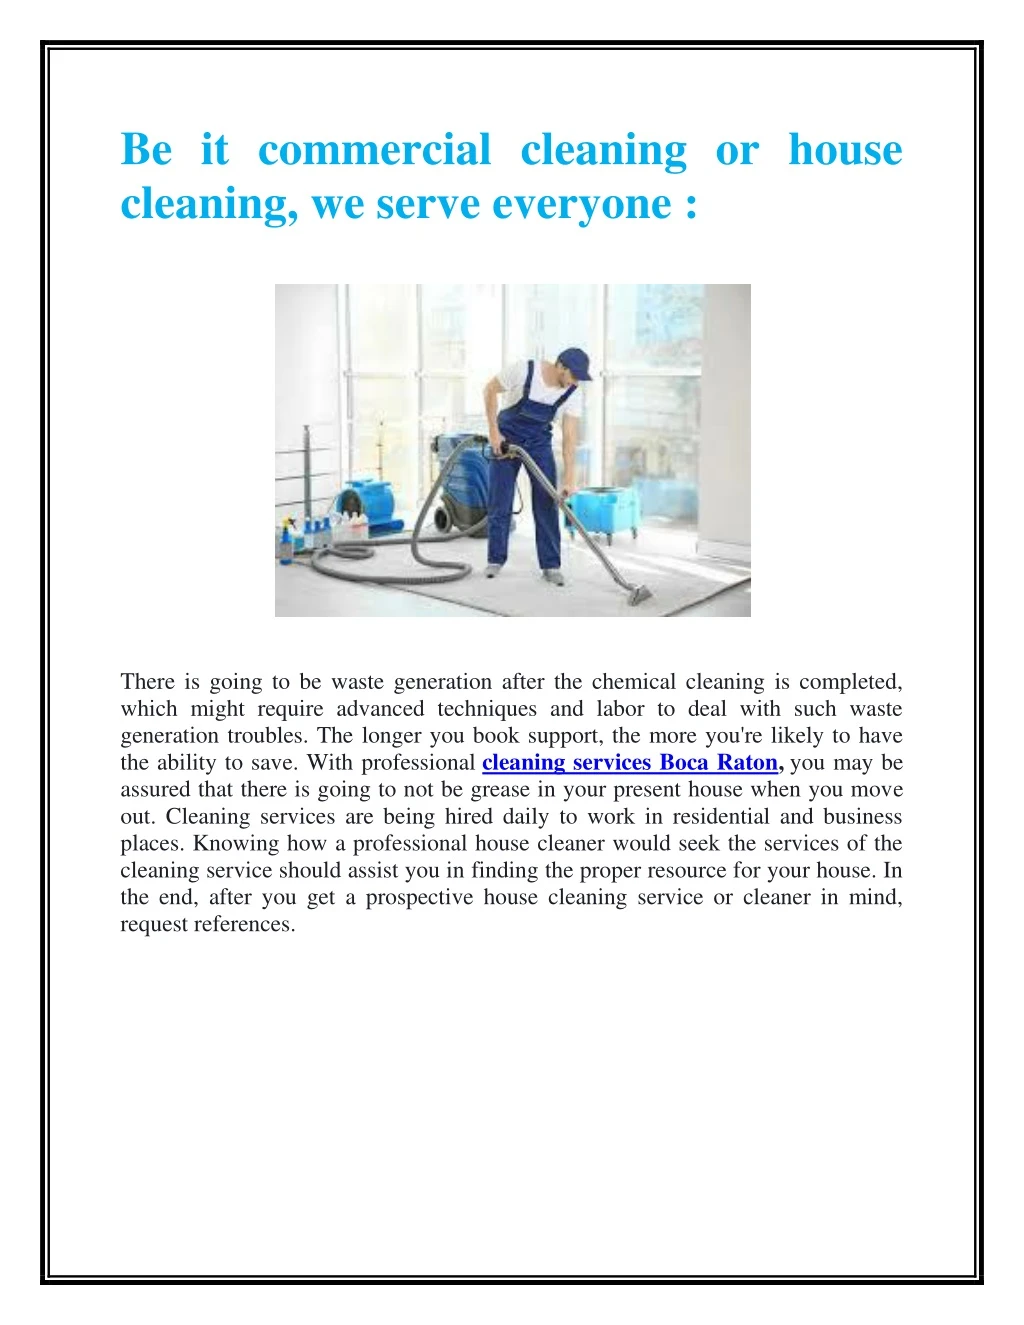 be it commercial cleaning or house cleaning